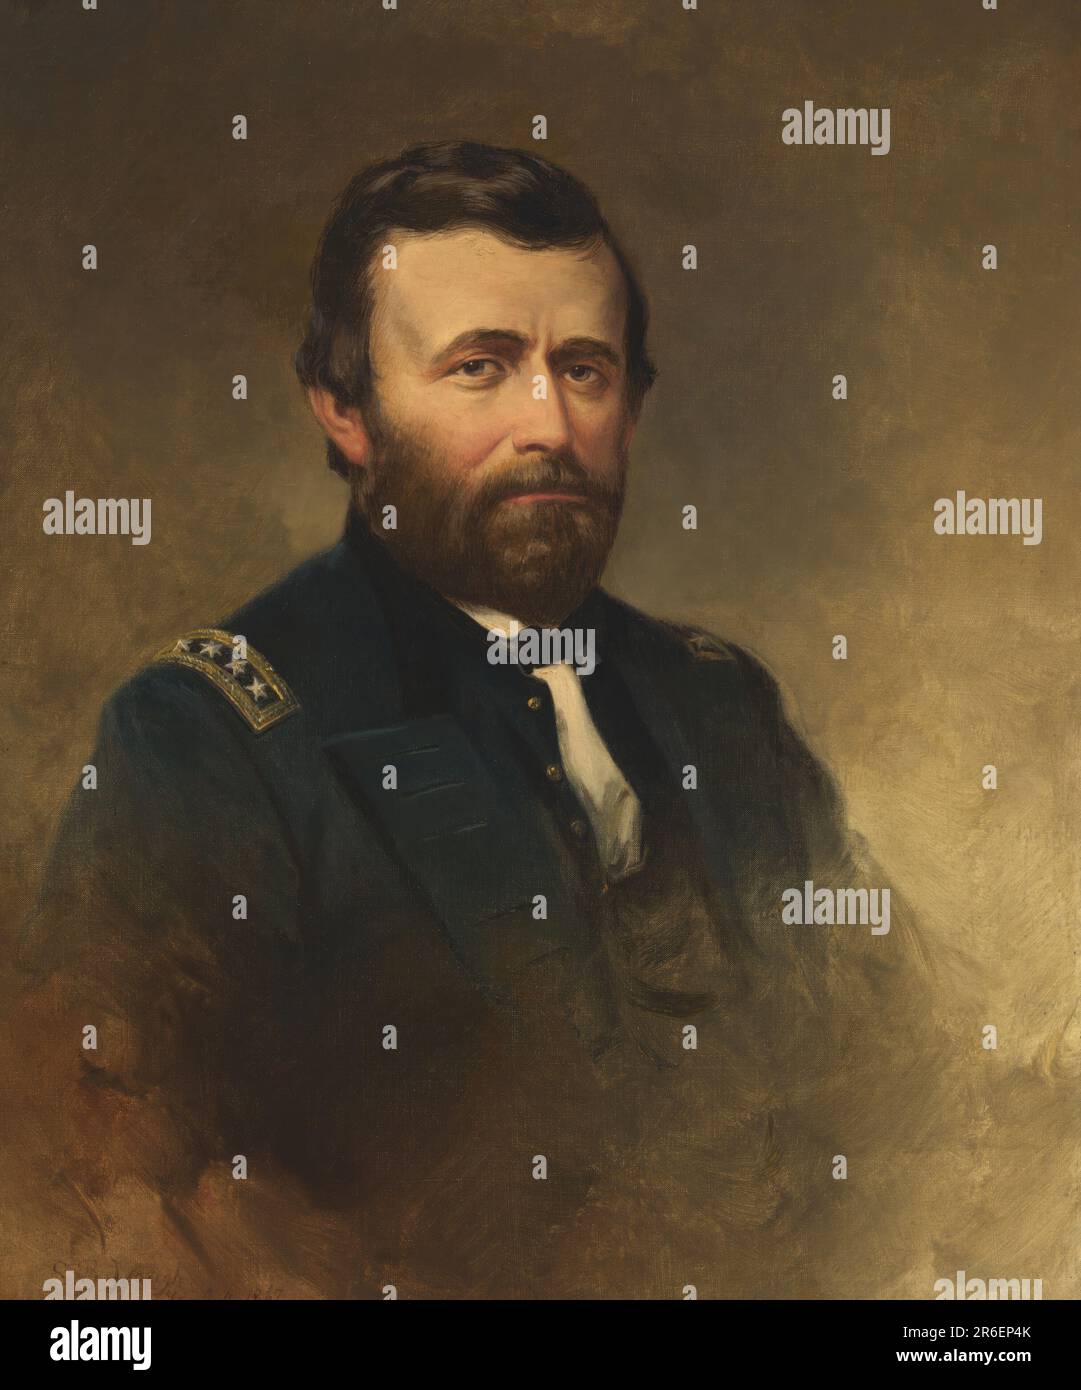 Ulysses S. Grant. Date: 1869. Oil on canvas mounted on Masonite. Museum: NATIONAL PORTRAIT GALLERY. Ulysses Simpson Grant. Stock Photo